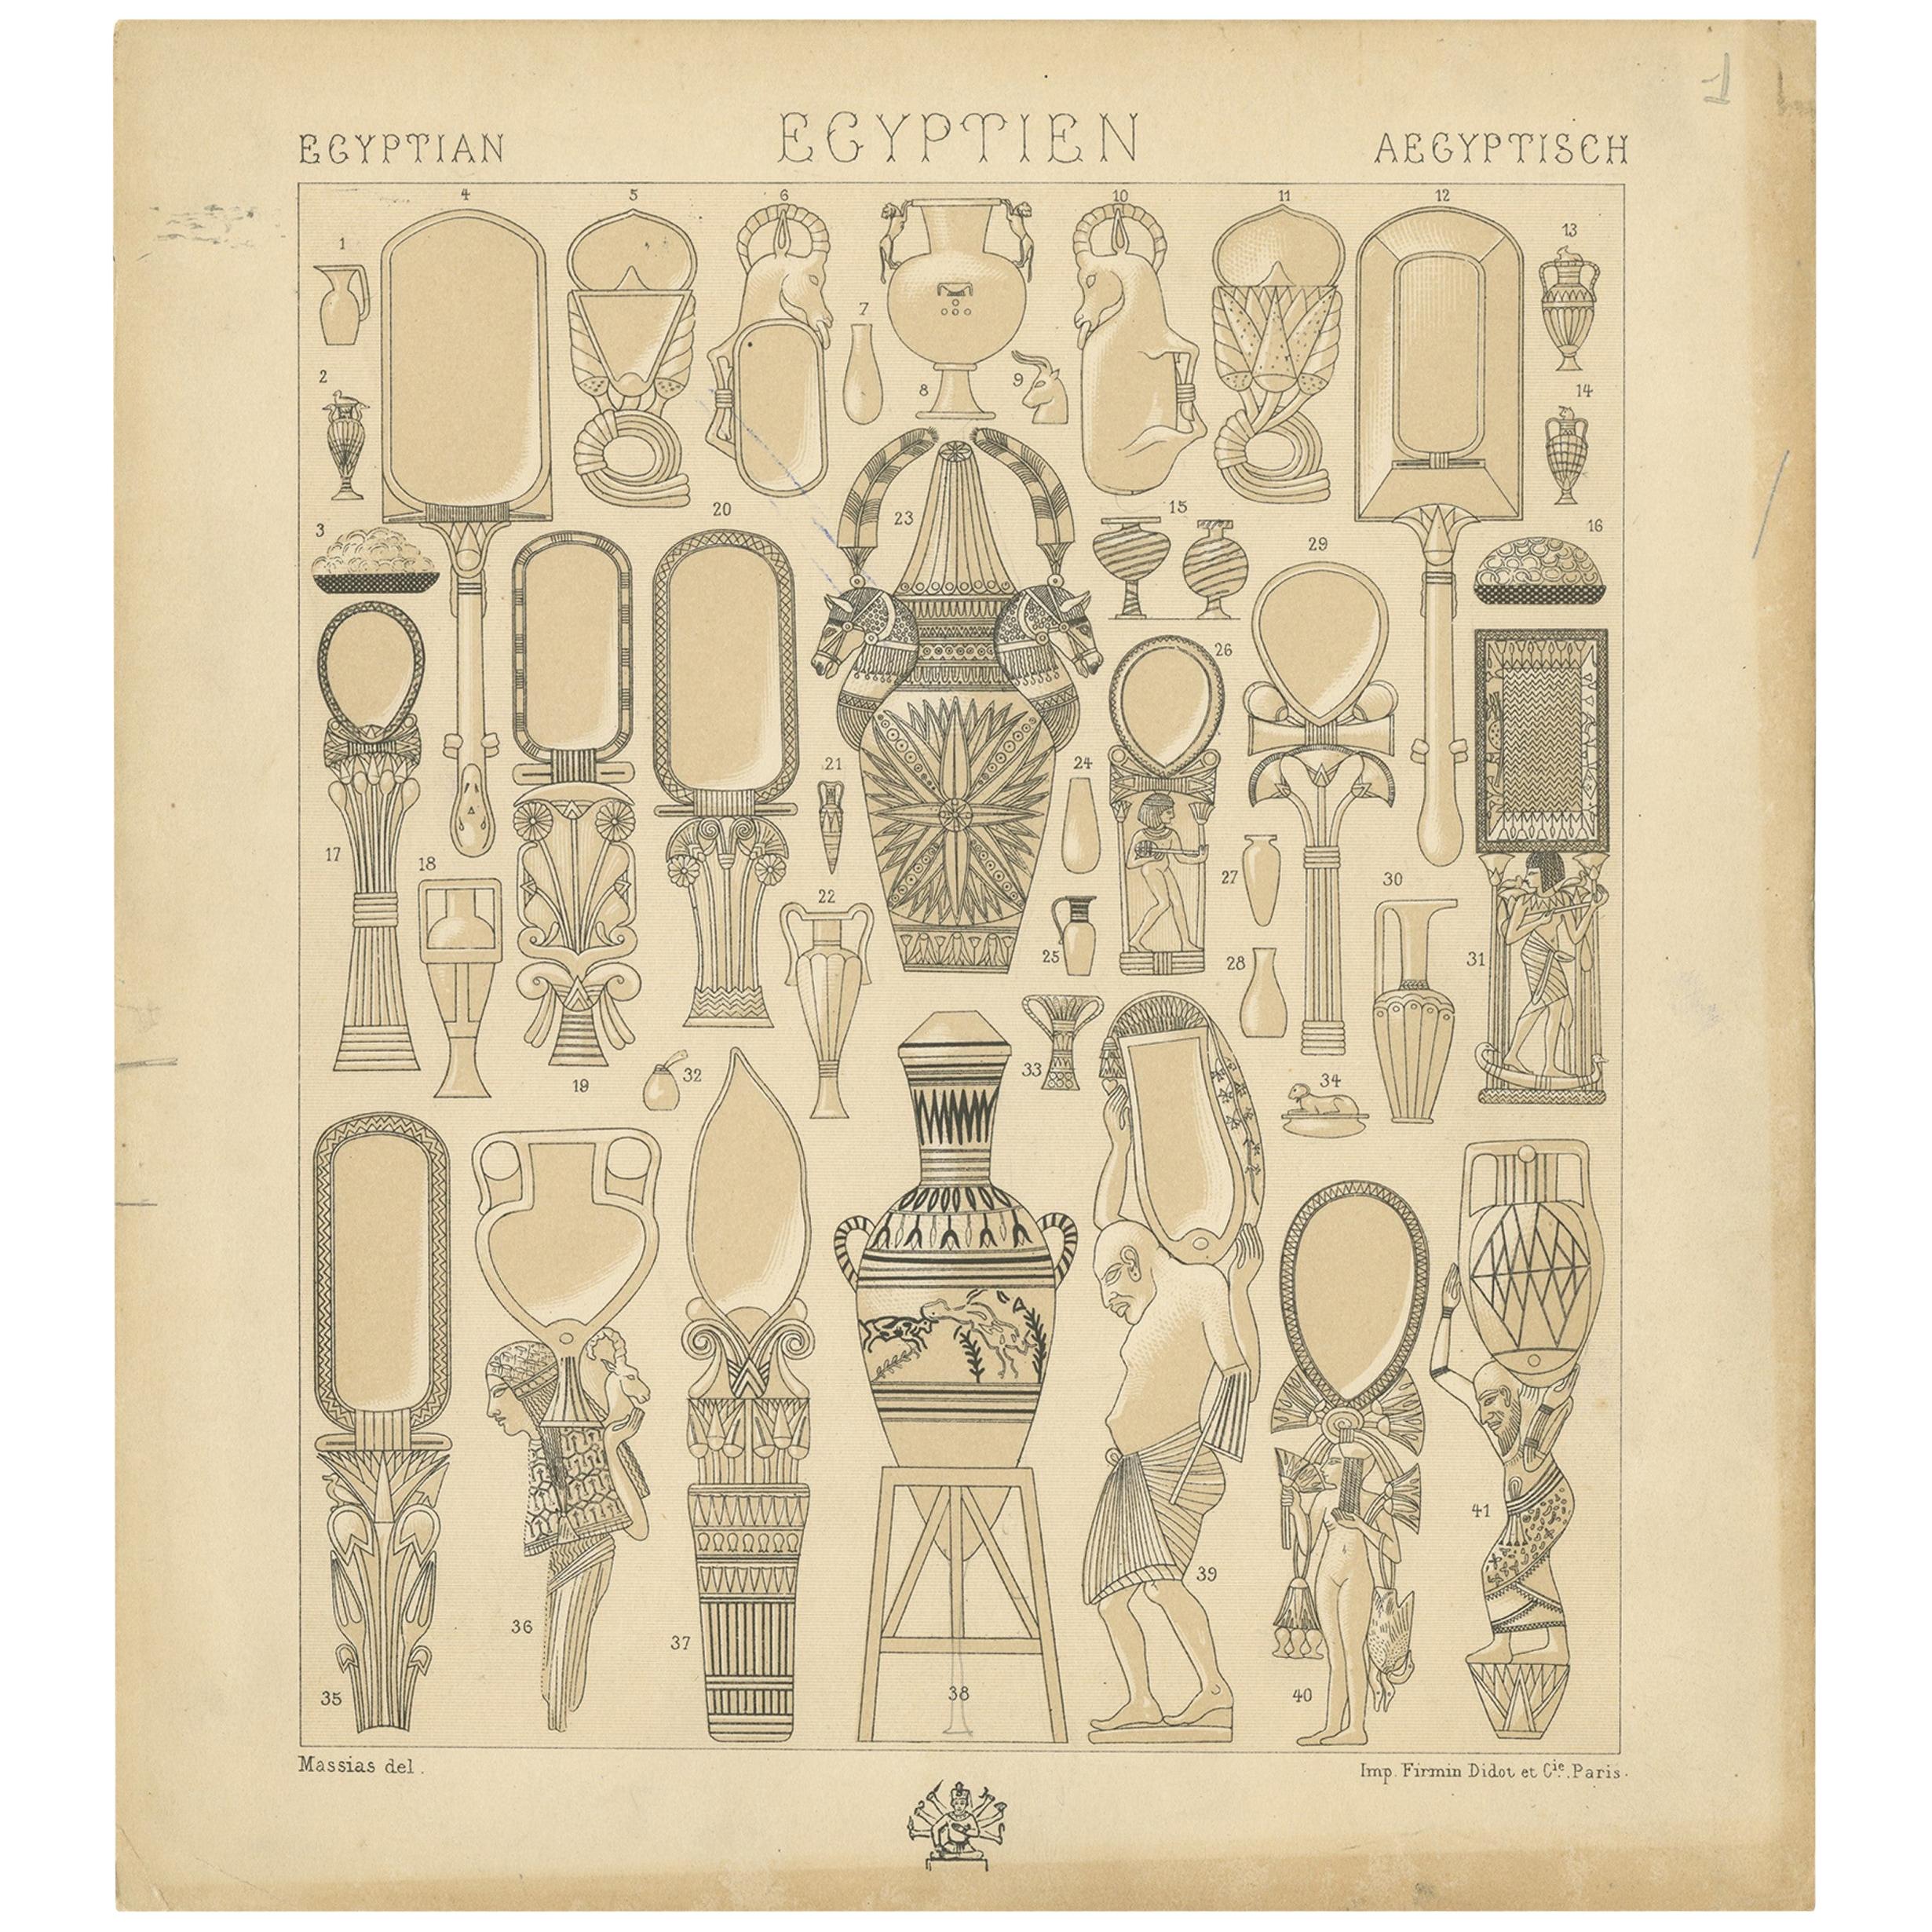 Pl. 1 Antique Print of Egyptian Decorative Objects by Racinet, 'circa 1880'